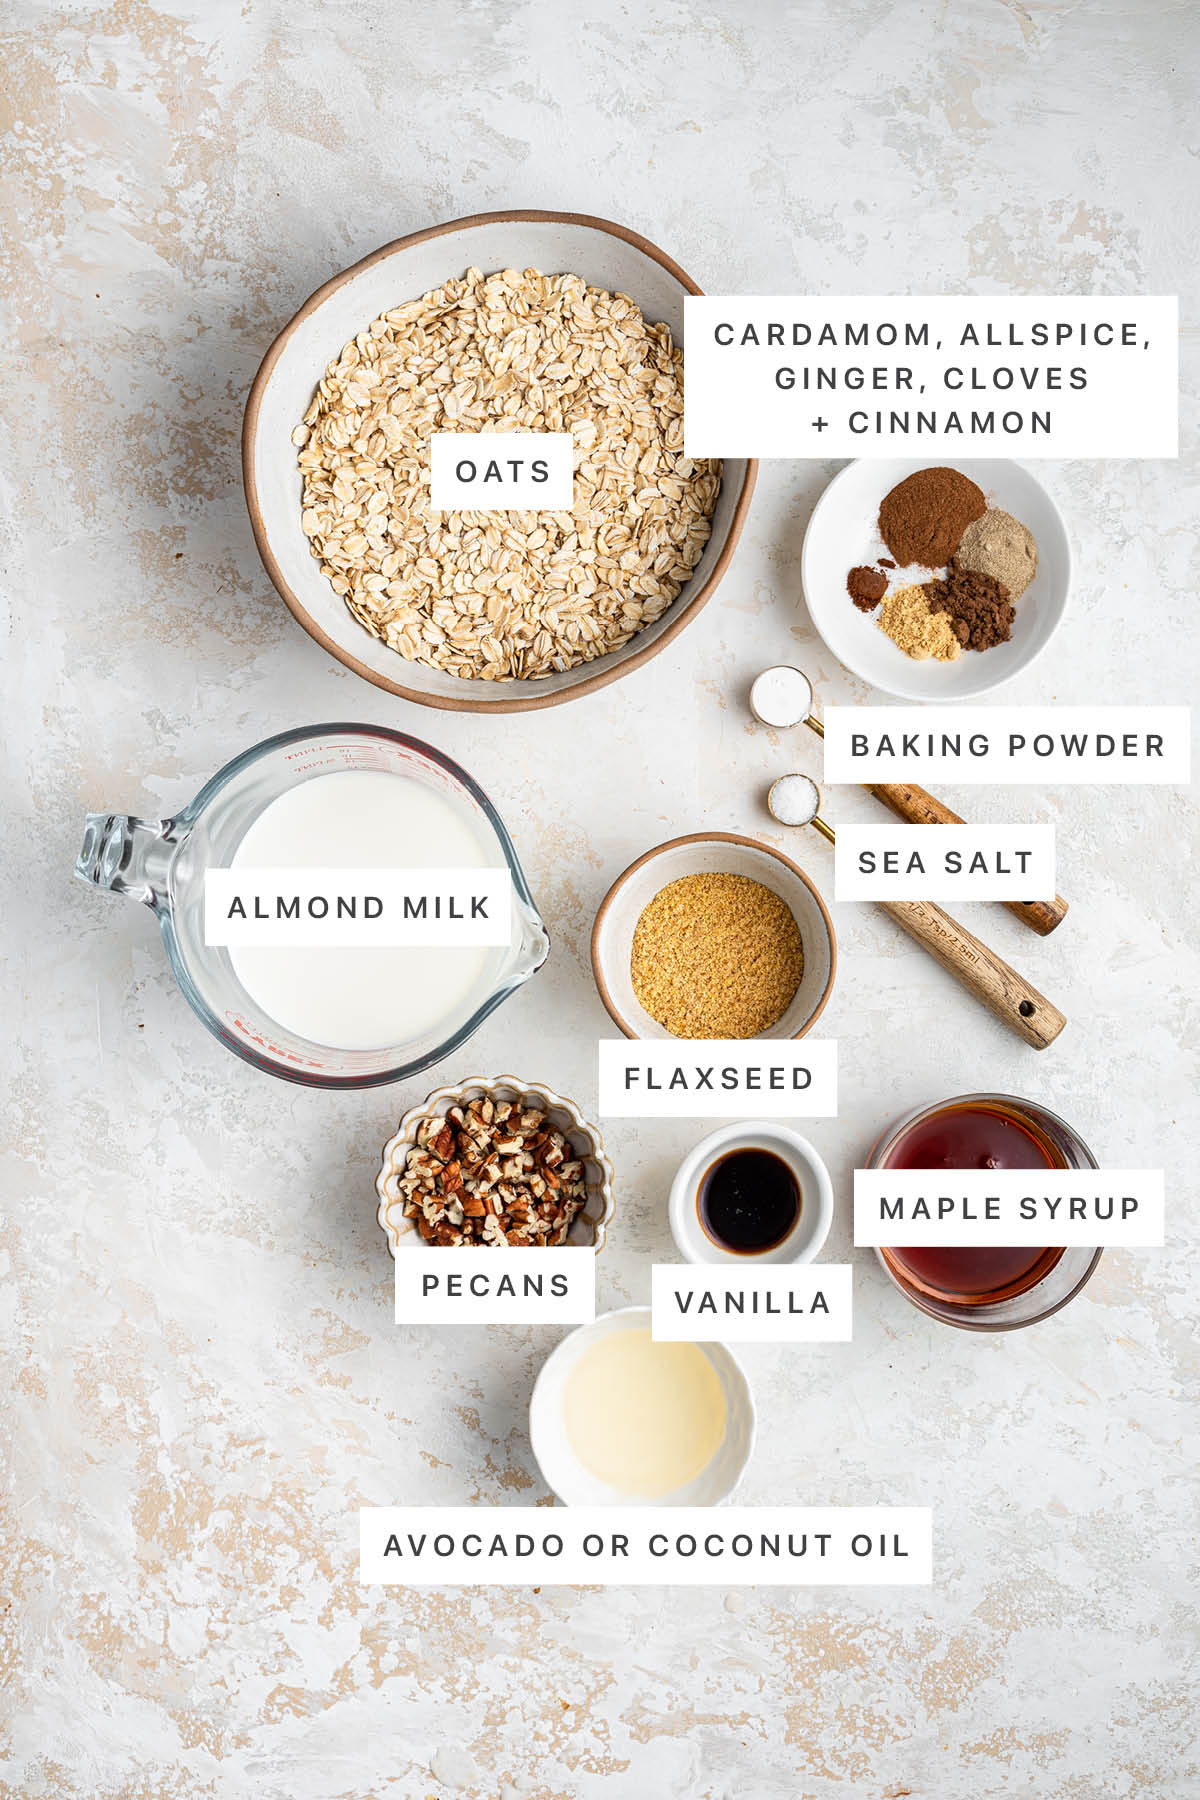 Ingredients measured out to make Chai Baked Oatmeal Cups: oats, cardamom, allspice, ginger, cloves, cinnamon, baking powder, sea salt, almond milk, flaxseed, pecans, vanilla, maple syrup and coconut/avocado oil.